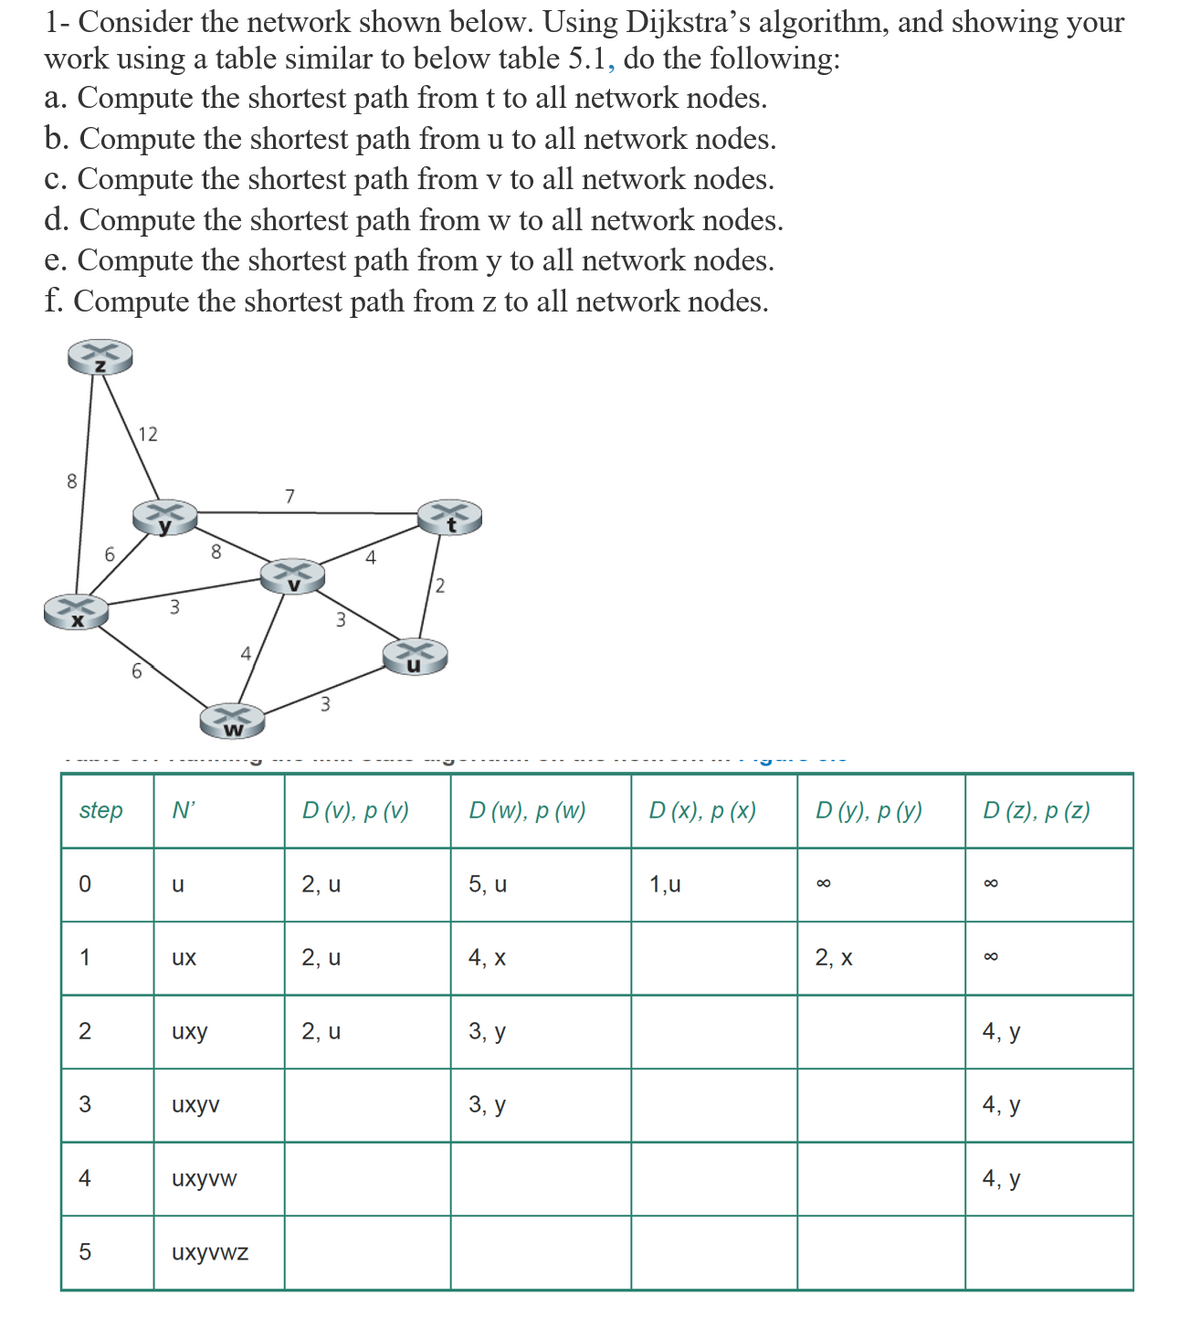 1- Consider the network shown below. Using Dijkstra's algorithm, and showing your
work using a table similar to below table 5.1, do the following:
a. Compute the shortest path from t to all network nodes.
b. Compute the shortest path from u to all network nodes.
c. Compute the shortest path from v to all network nodes.
d. Compute the shortest path from w to all network nodes.
e. Compute the shortest path from y to all network nodes.
f. Compute the shortest path from z to all network nodes.
8
step
0
1
2
3
4
5
12
3
N'
u
ux
uxy
8
uxyv
4
W
uxyvw
uxyvwz
7
3
D (V), p (v)
2, u
2, u
4
2, u
12
D (w), p (w)
5, u
4, x
3, y
3, y
D (x), p (x)
1,u
D (y), p (y)
∞
2, X
D (Z), p (z)
∞
∞
4, y
4, y
4, y